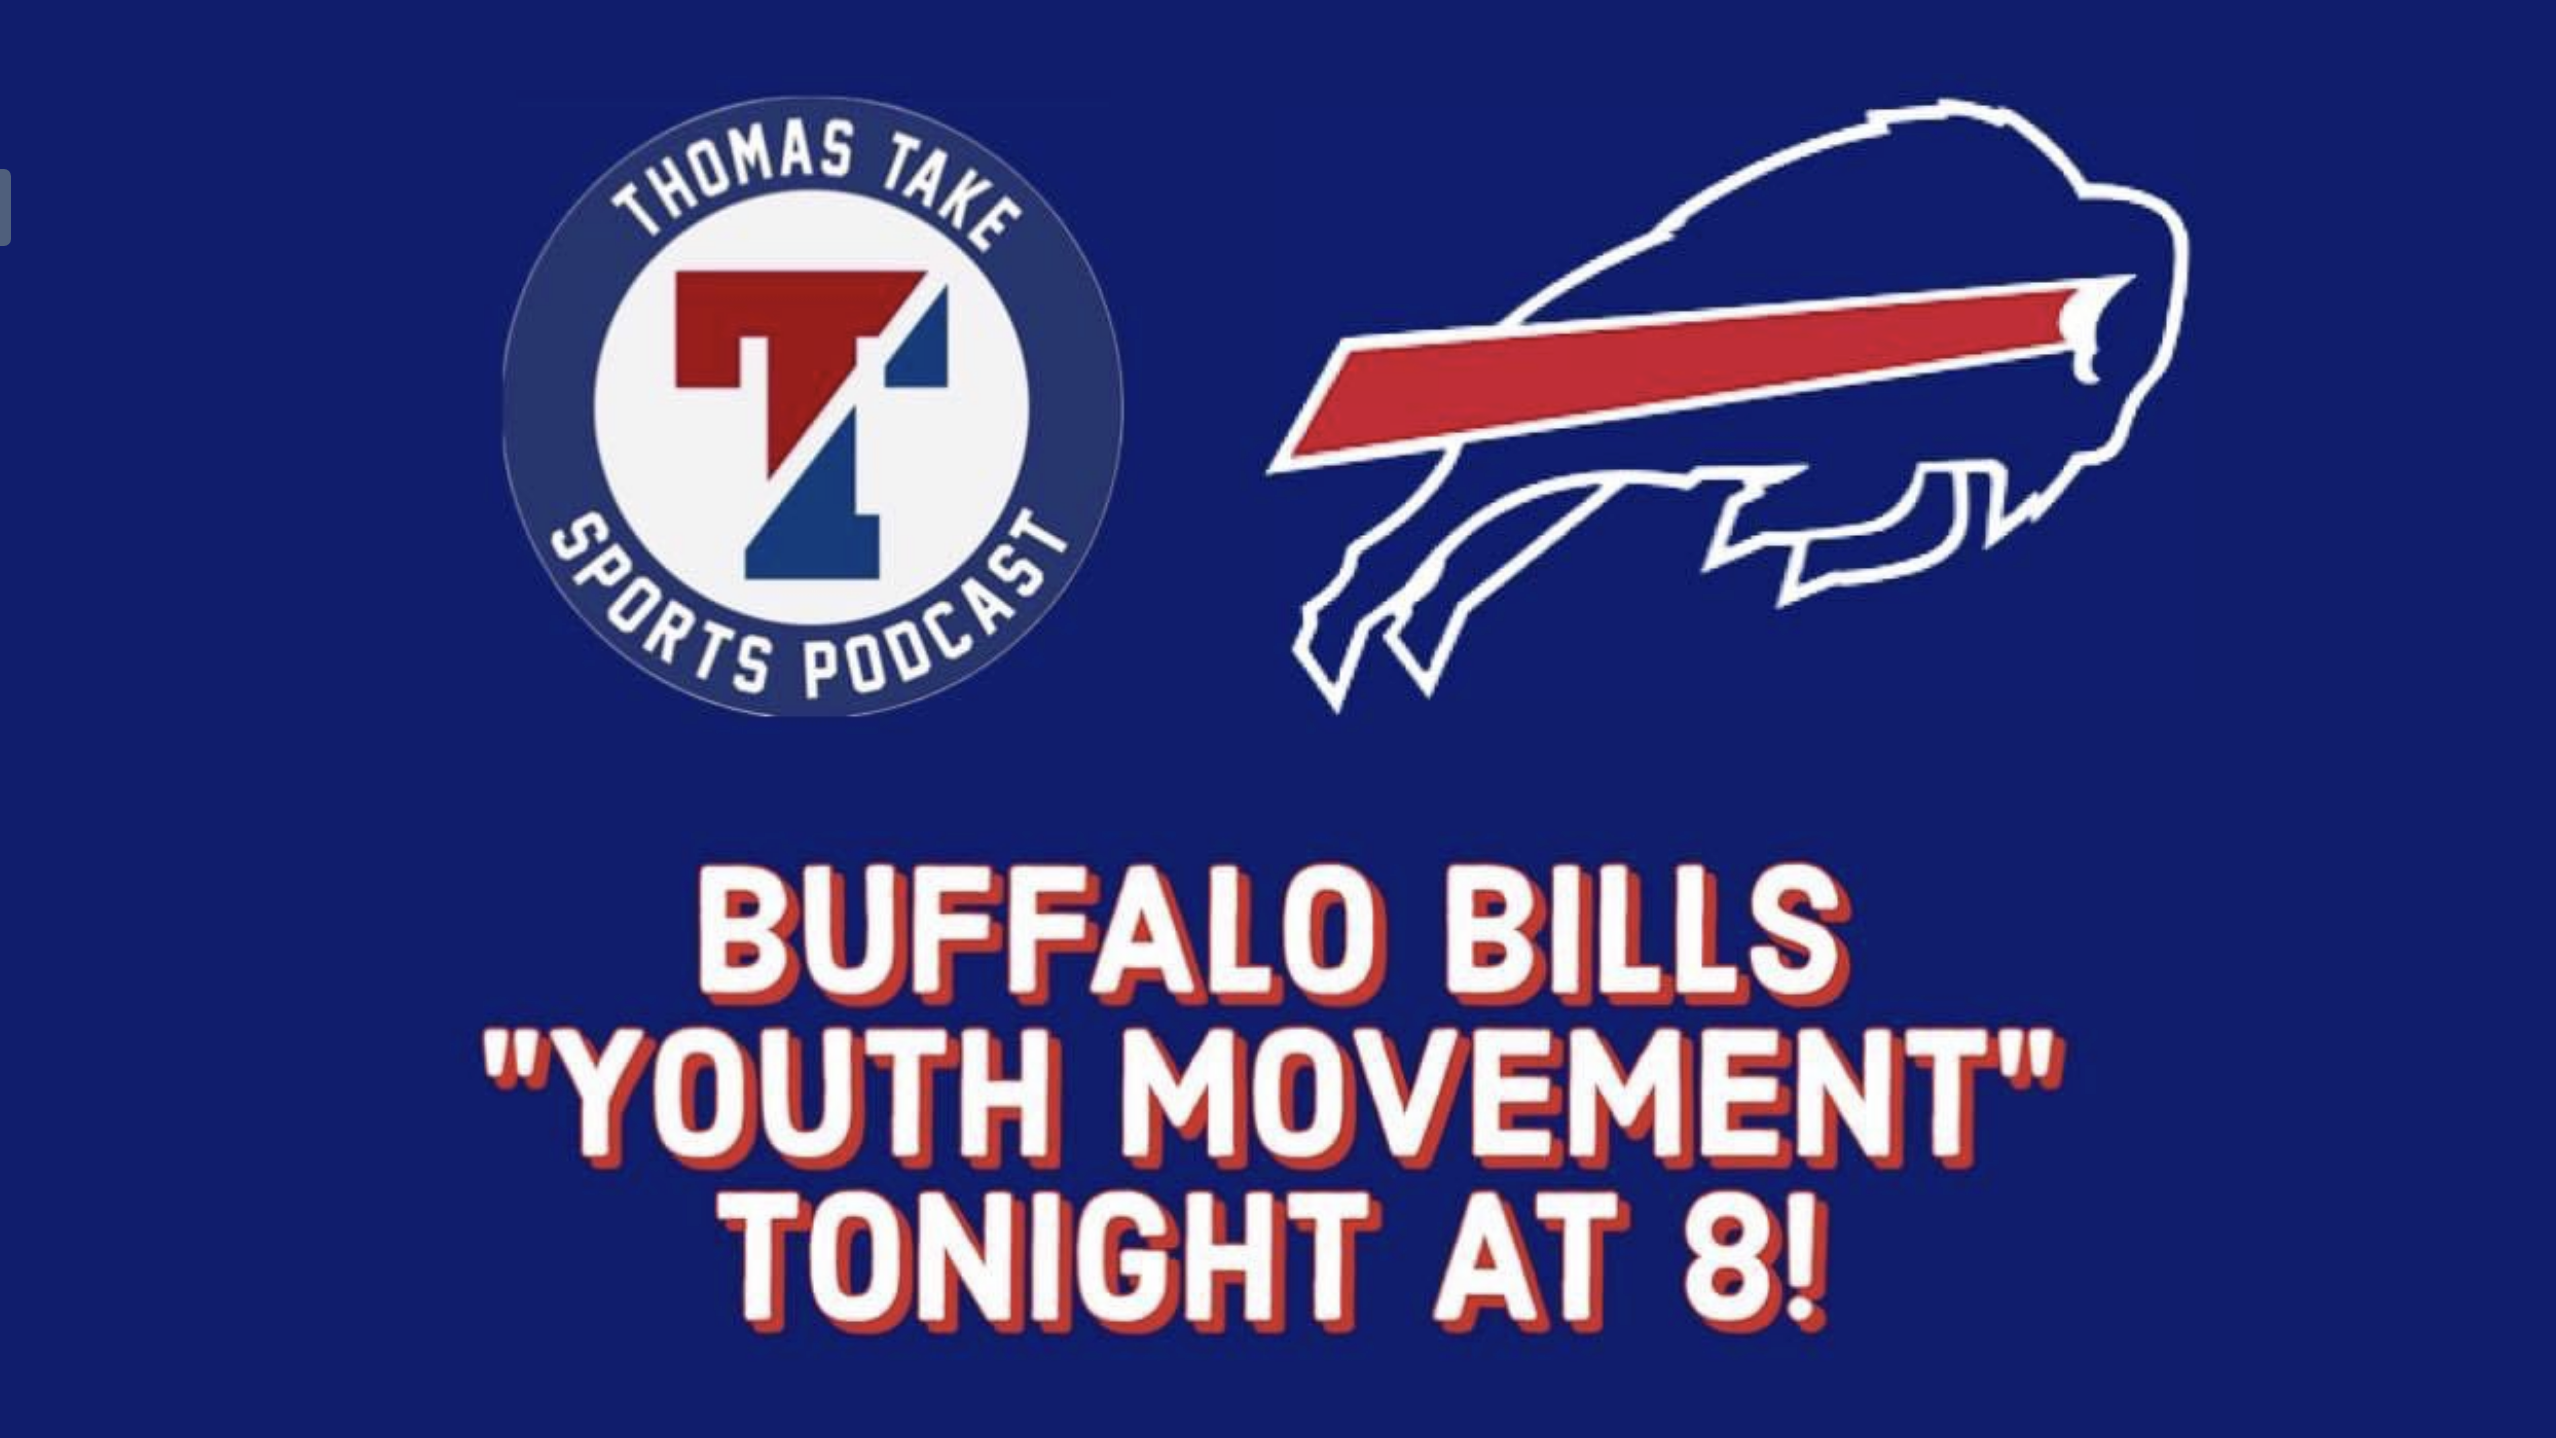 Thomas Take Sports Podcast Looks at Youth Movement